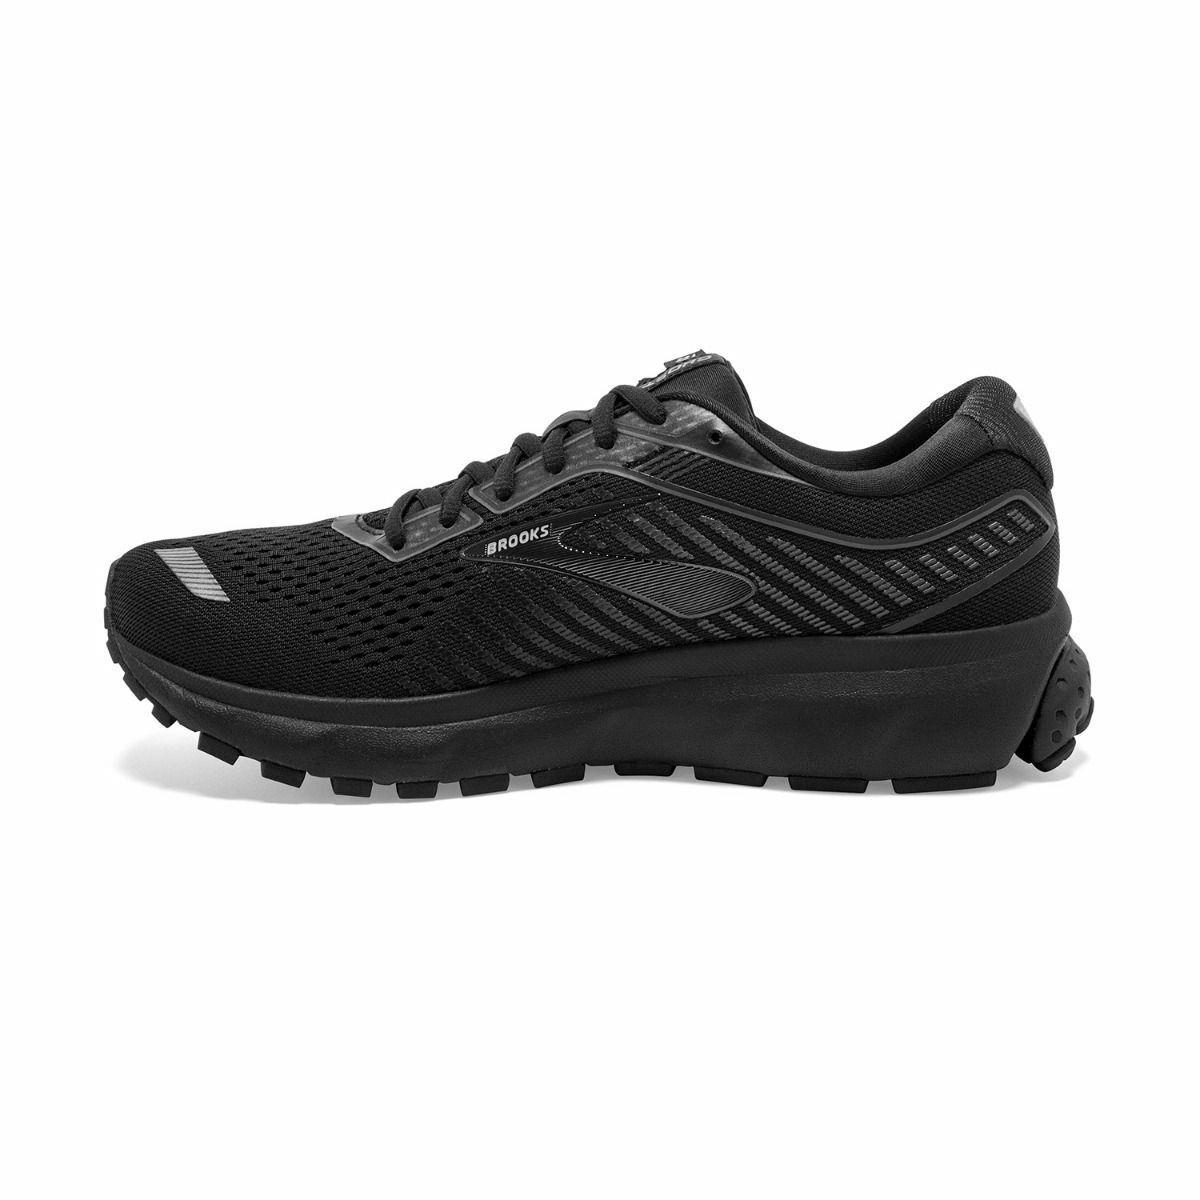 Brooks shoes Ghost - Black 0